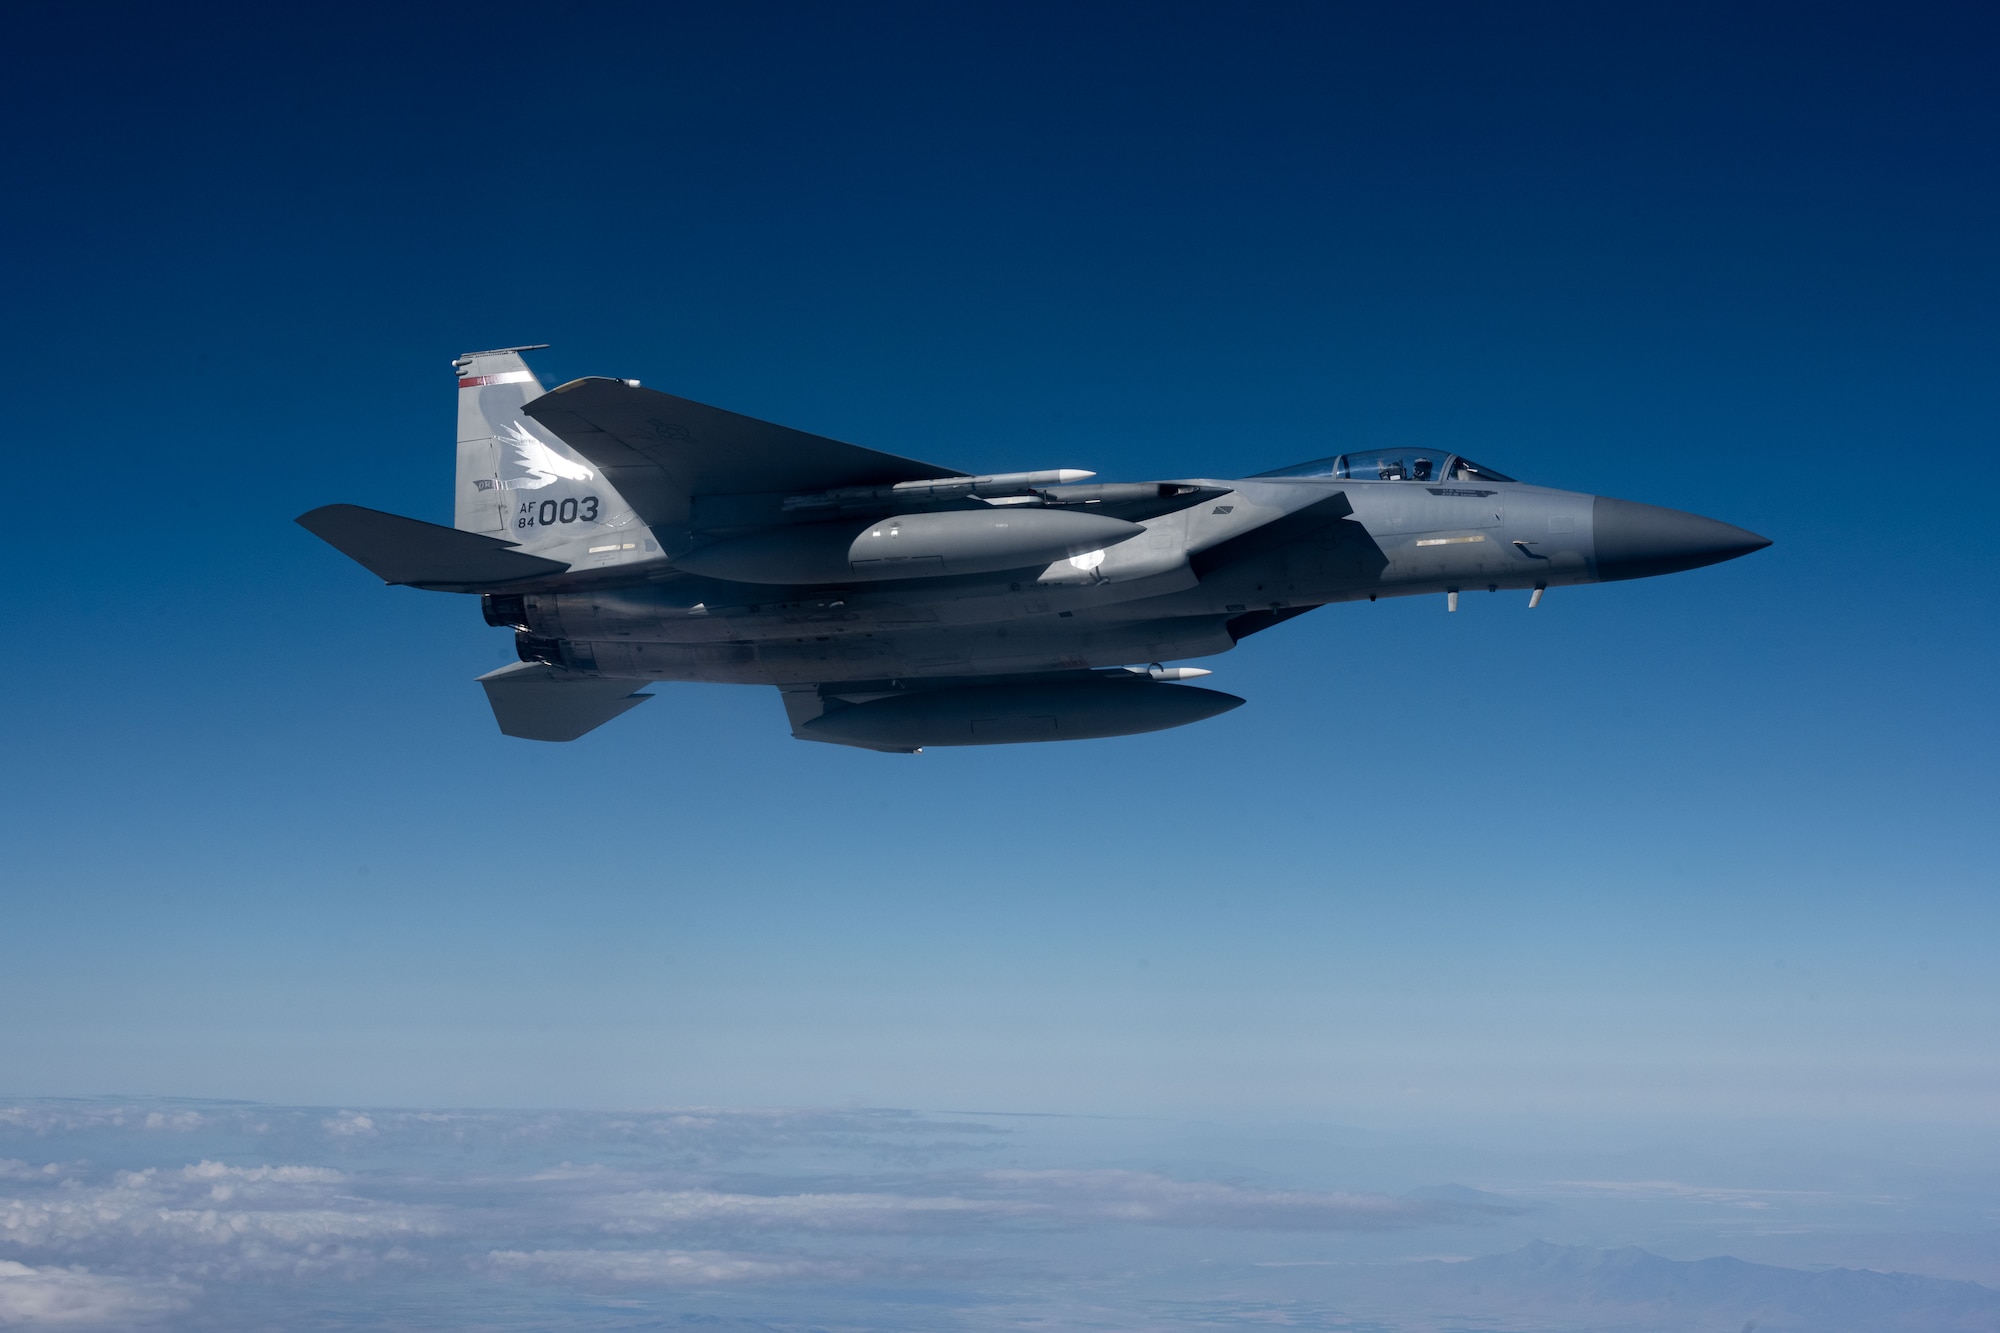 A F-15 jet aircraft is flying high in the sky.